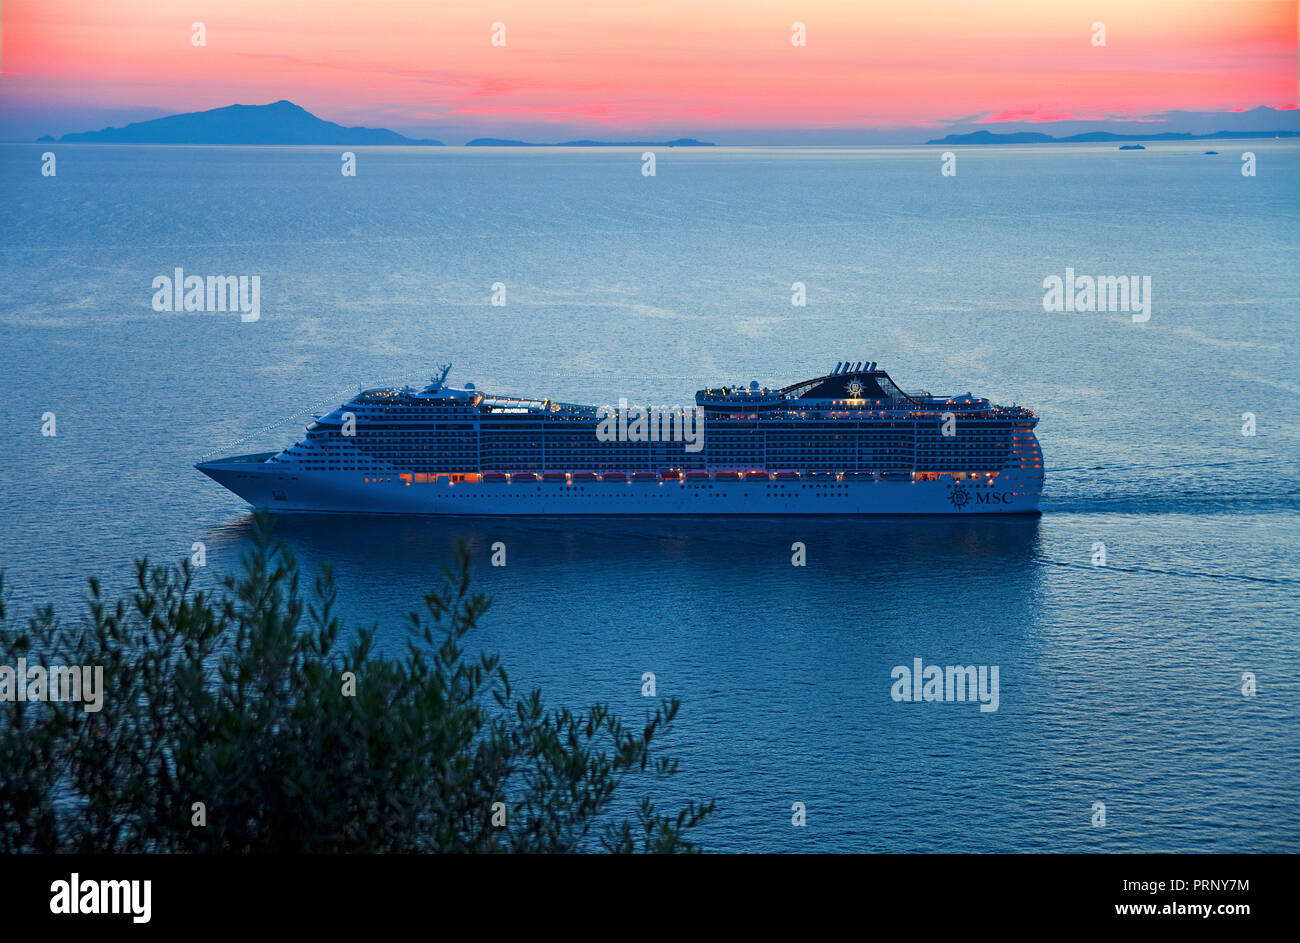 Cruise ship at sunset, view from Sorrento peninsula, left side behind Capri island, Gulf of Naples, Campania, Italy Stock Photo